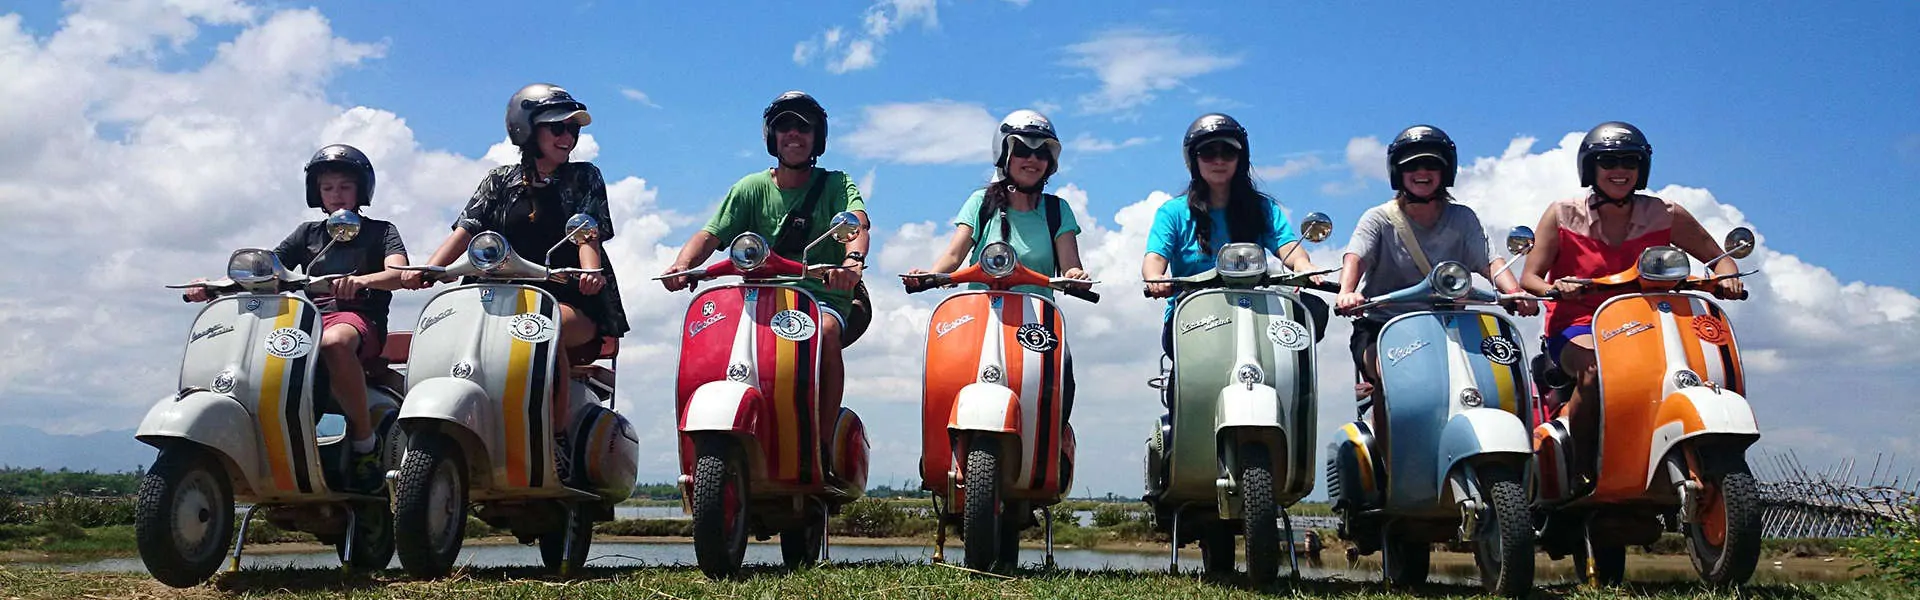 Hue Rural Life Discovery by Vespa